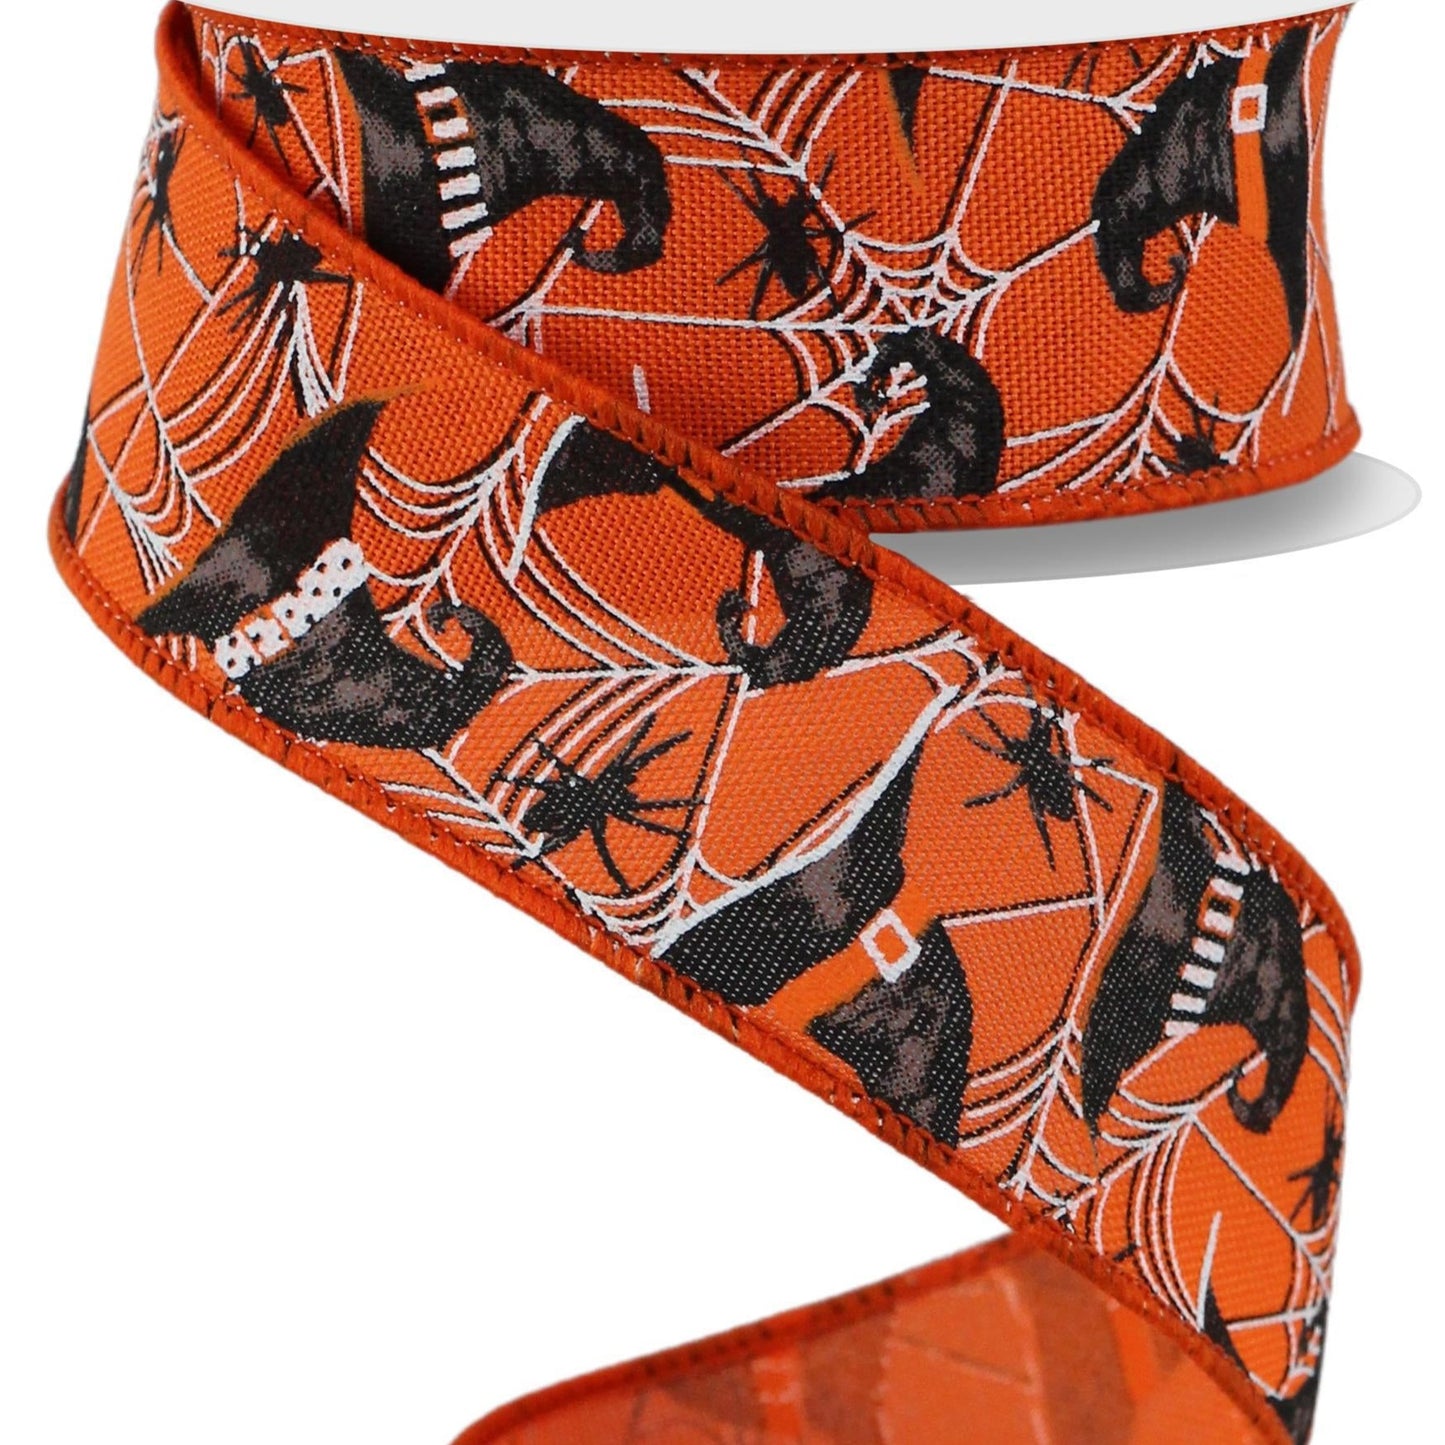 Wired Ribbon * Witch Hats and Spiders * Orange, White, Black and Grey 1.5" x 10 Yards Canvas * RGE153620